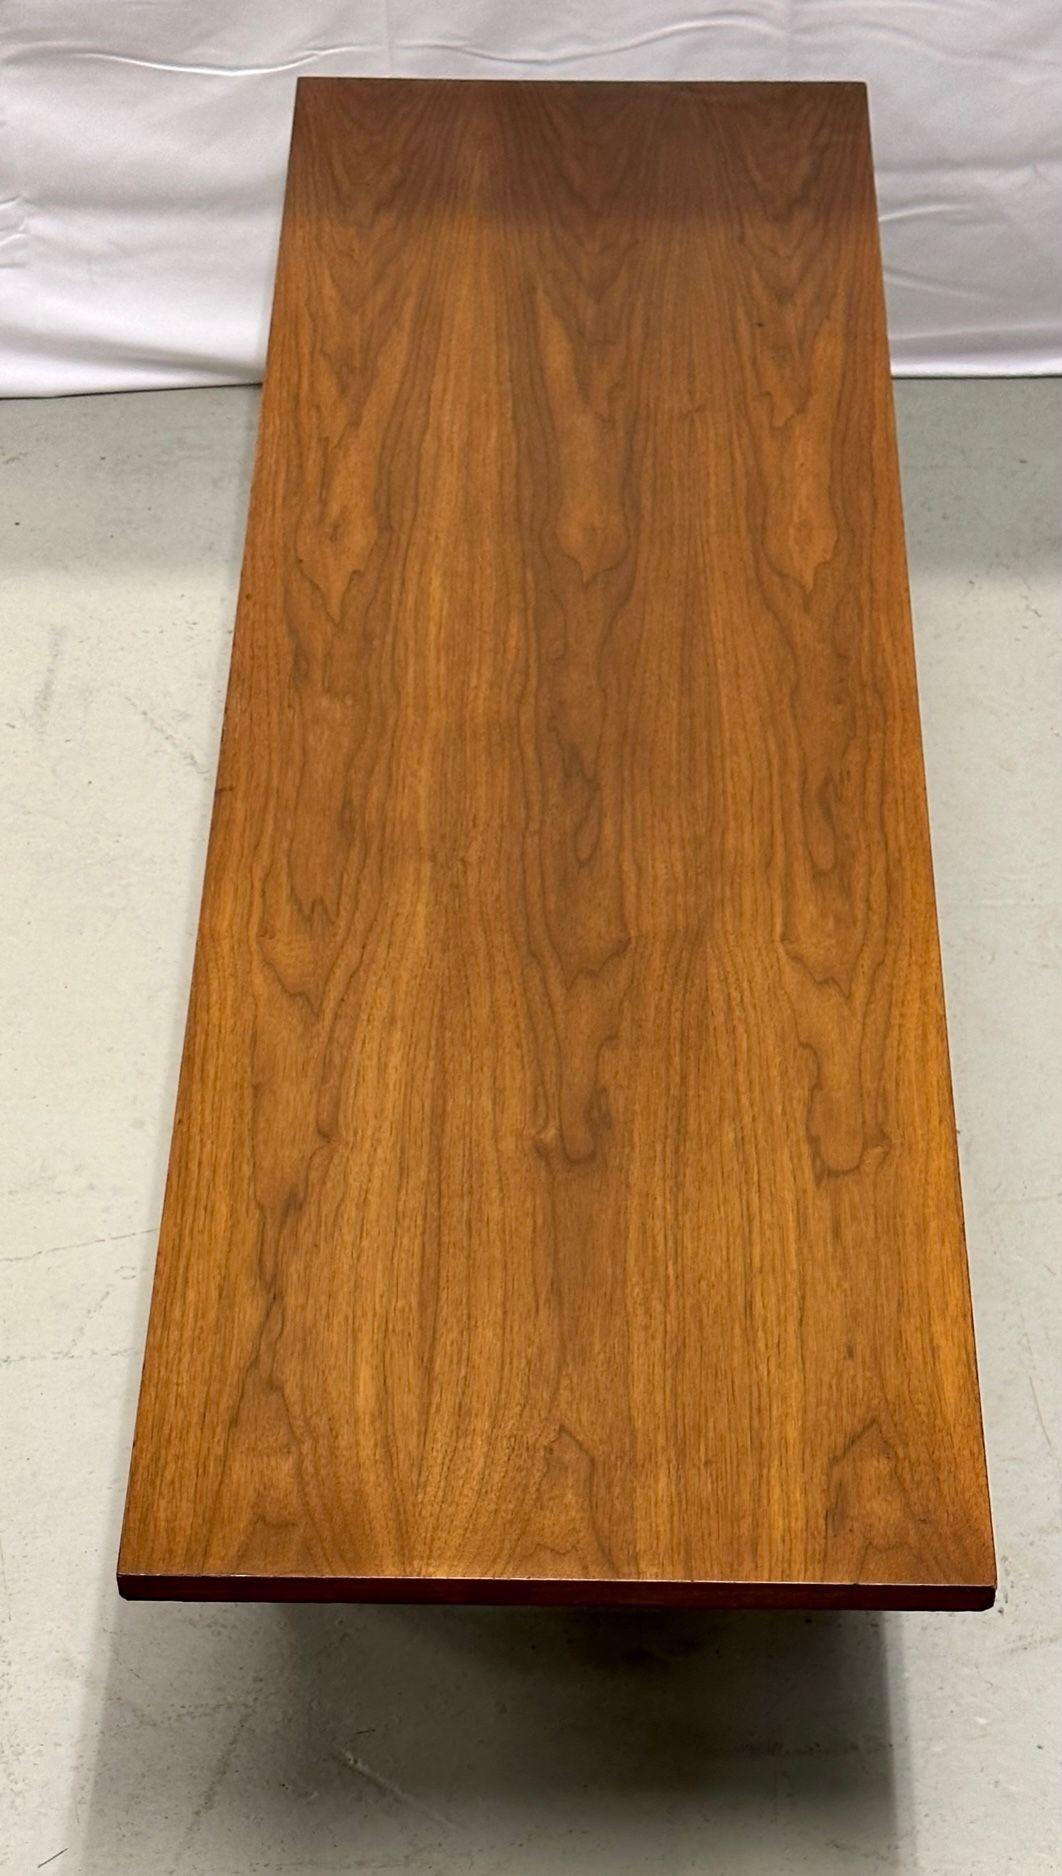 Danish Mid-Century Modern Cocktail or Coffee Table, 1950s, Solid Teak For Sale 8